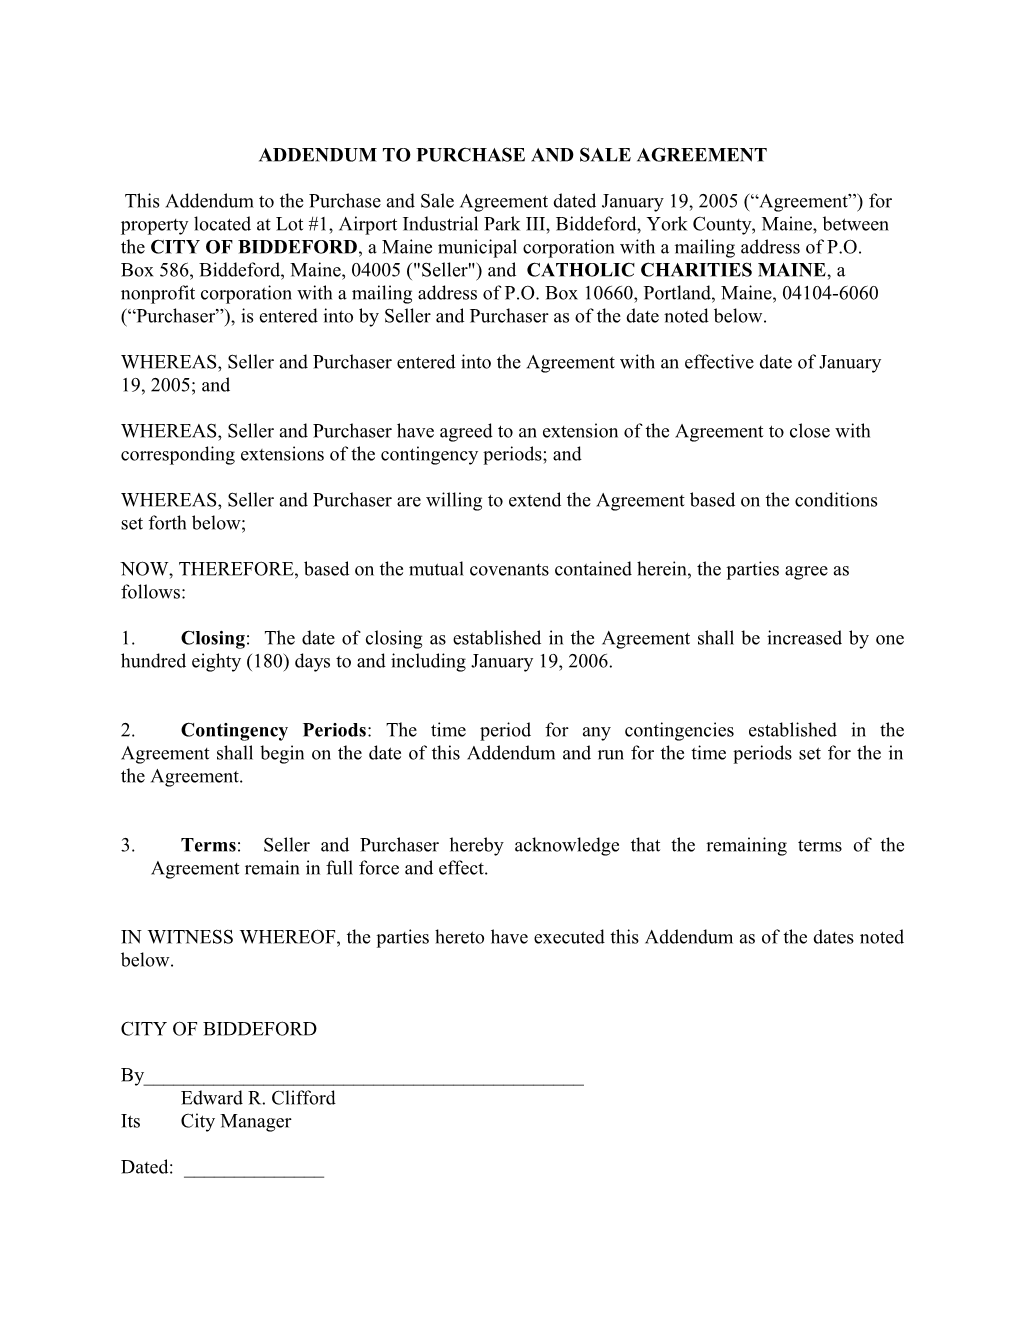 Addendum to Purchase and Sale Agreement